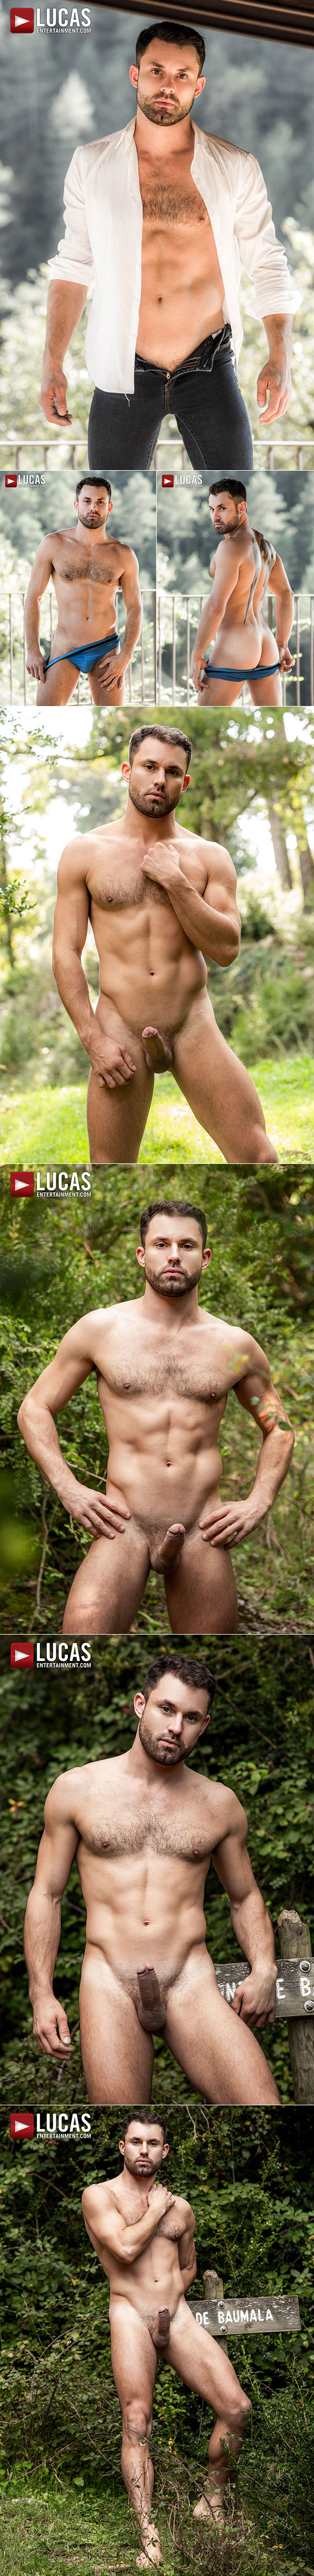 Lucas Entertainment: James Castle, Apolo Fire and Dani Robles' raw threesome in "Uncut in the Great Outdoors"